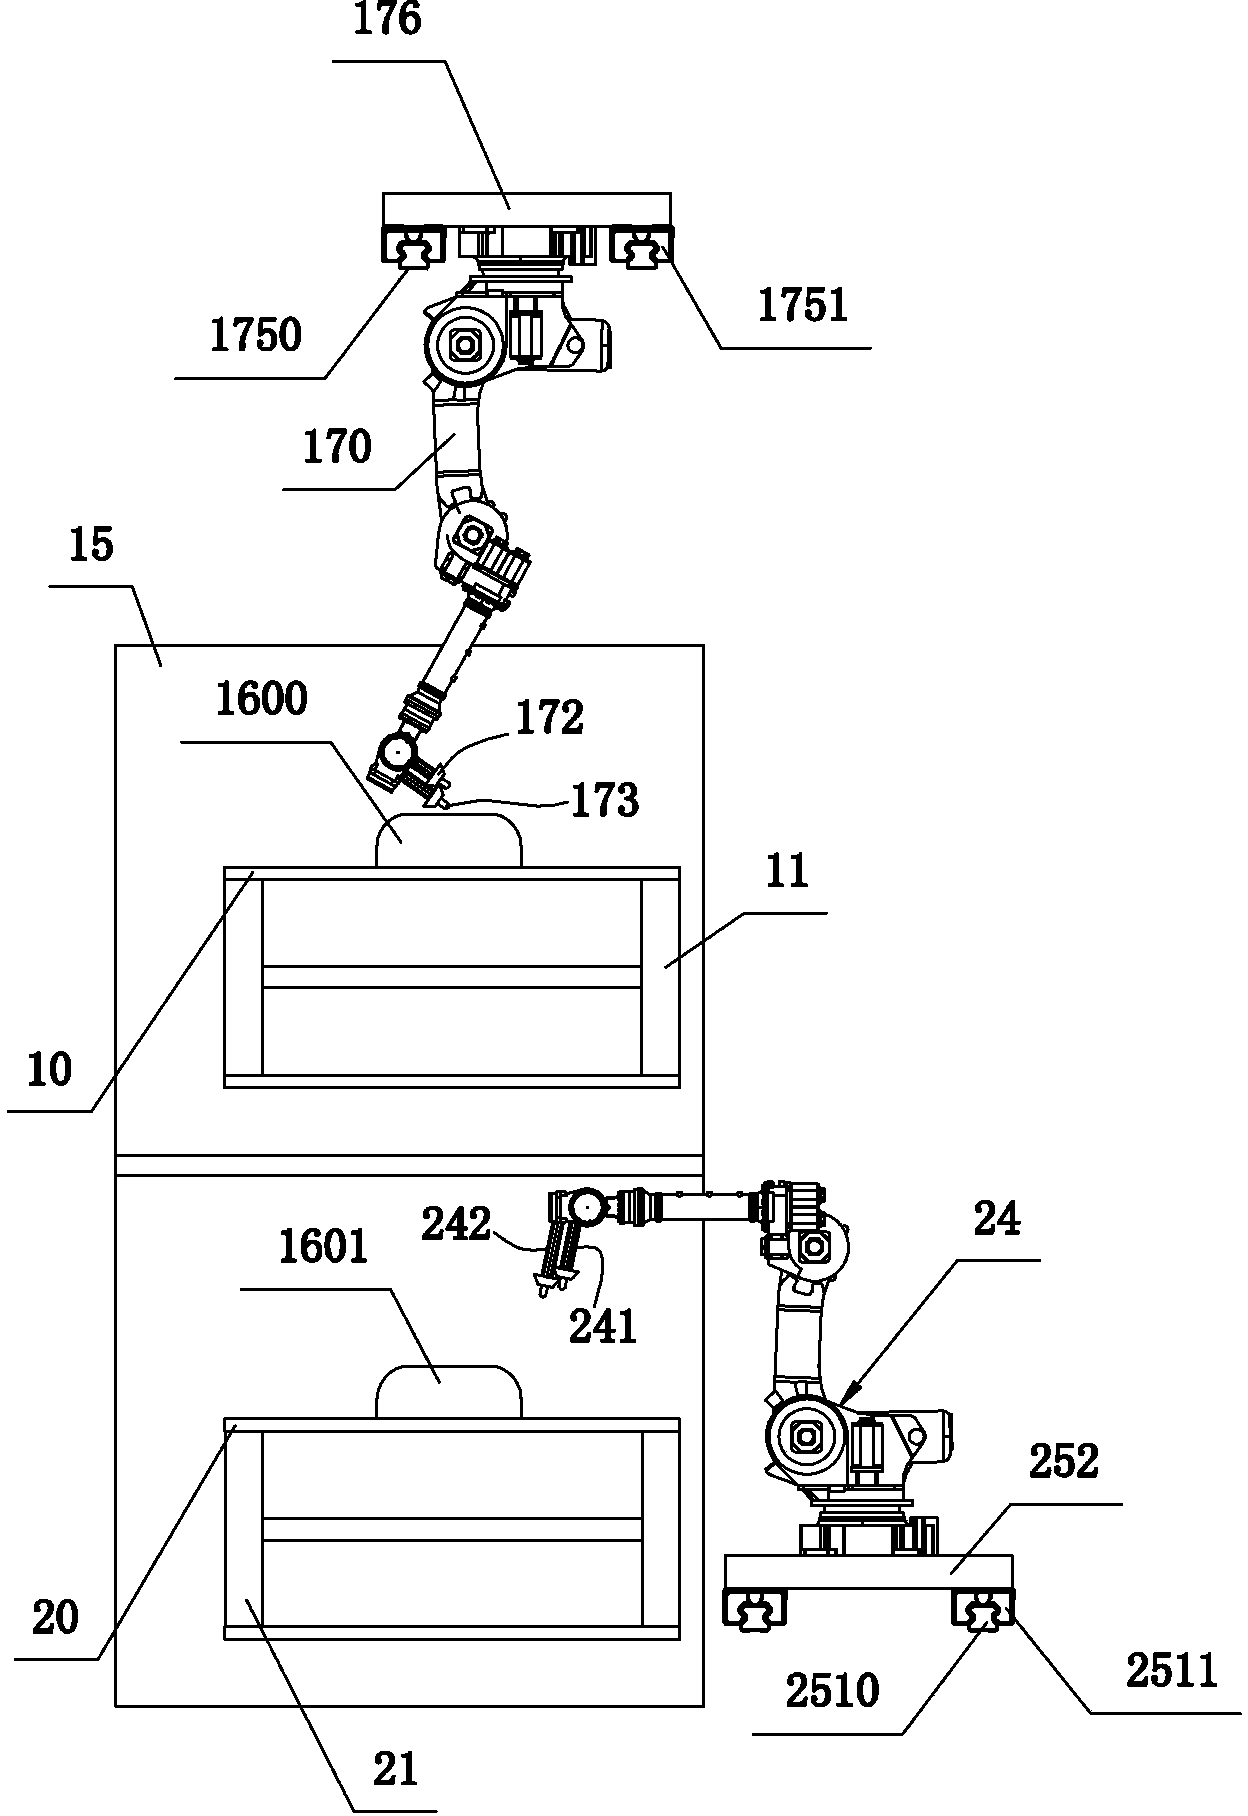 Automatic footwear production line with using space saved and automatic footwear making method